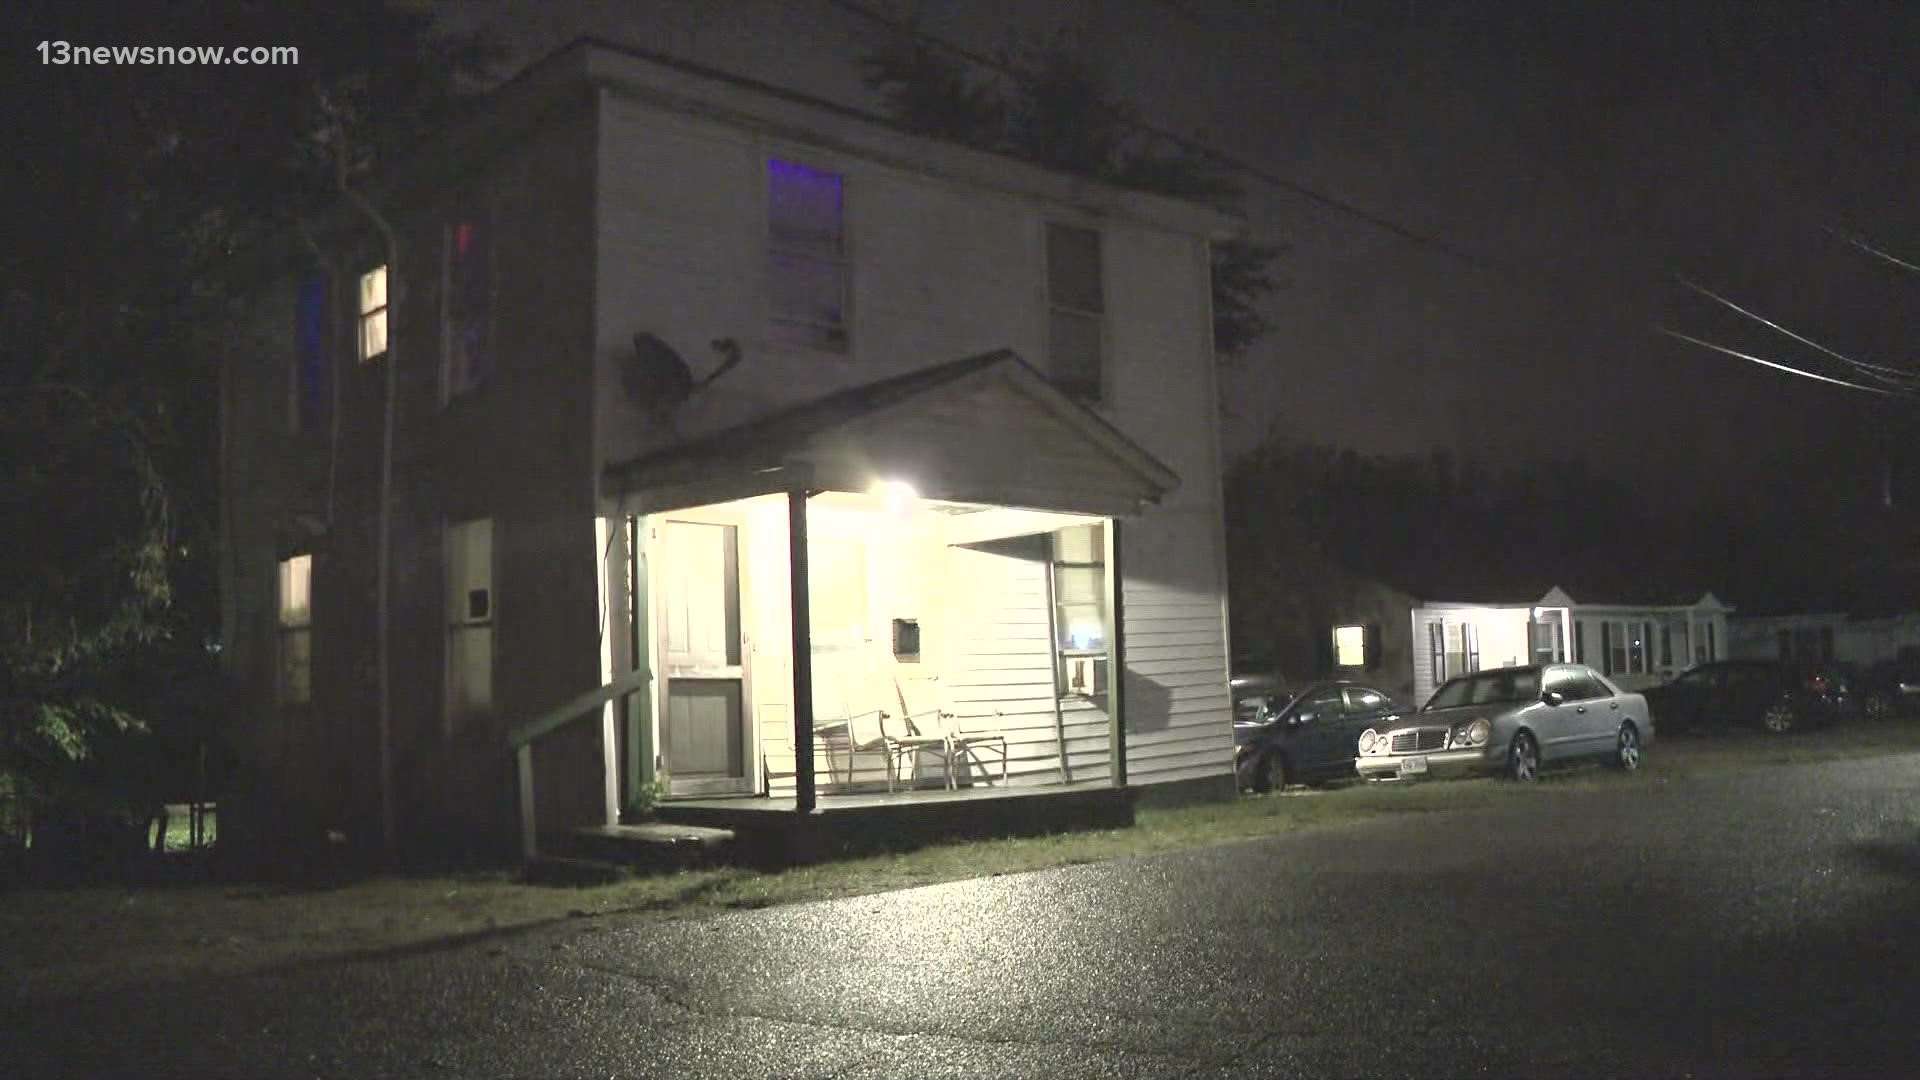 Suffolk police said two homes were damaged in a shooting Tuesday night in the 200 block of Columbus Ave. An infant was injured in the shooting.